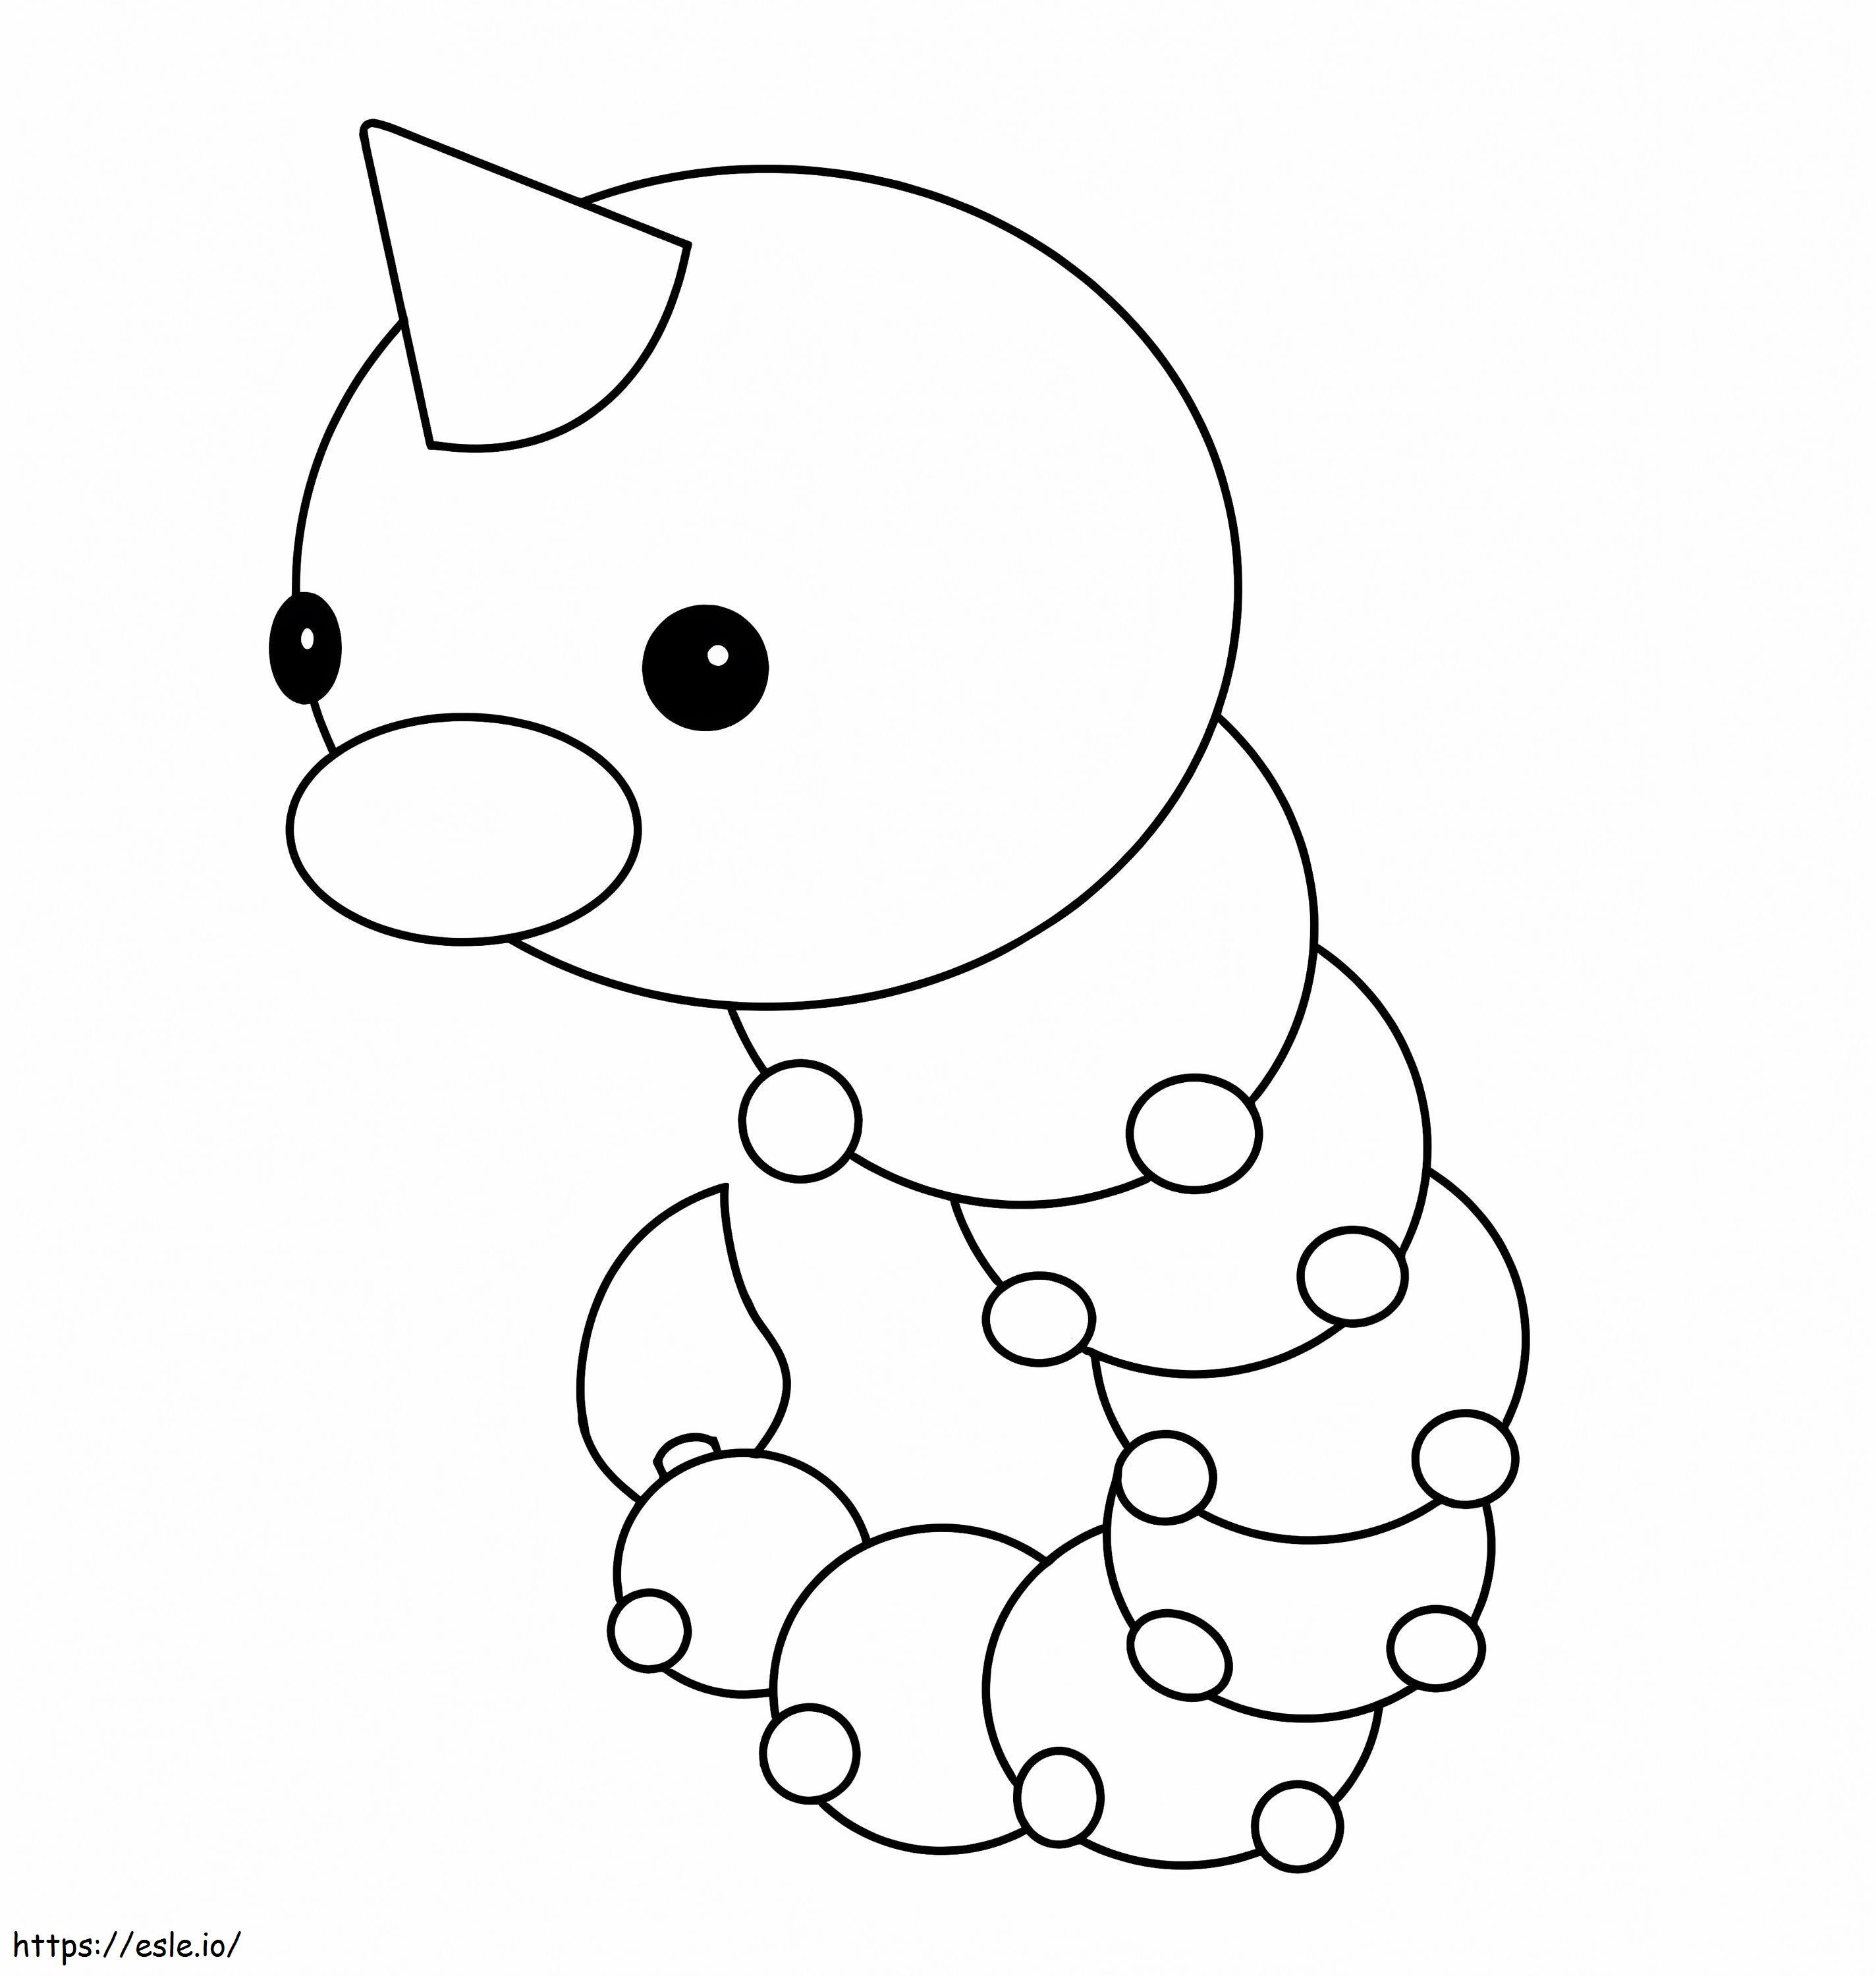 Weedle A Pokemon coloring page